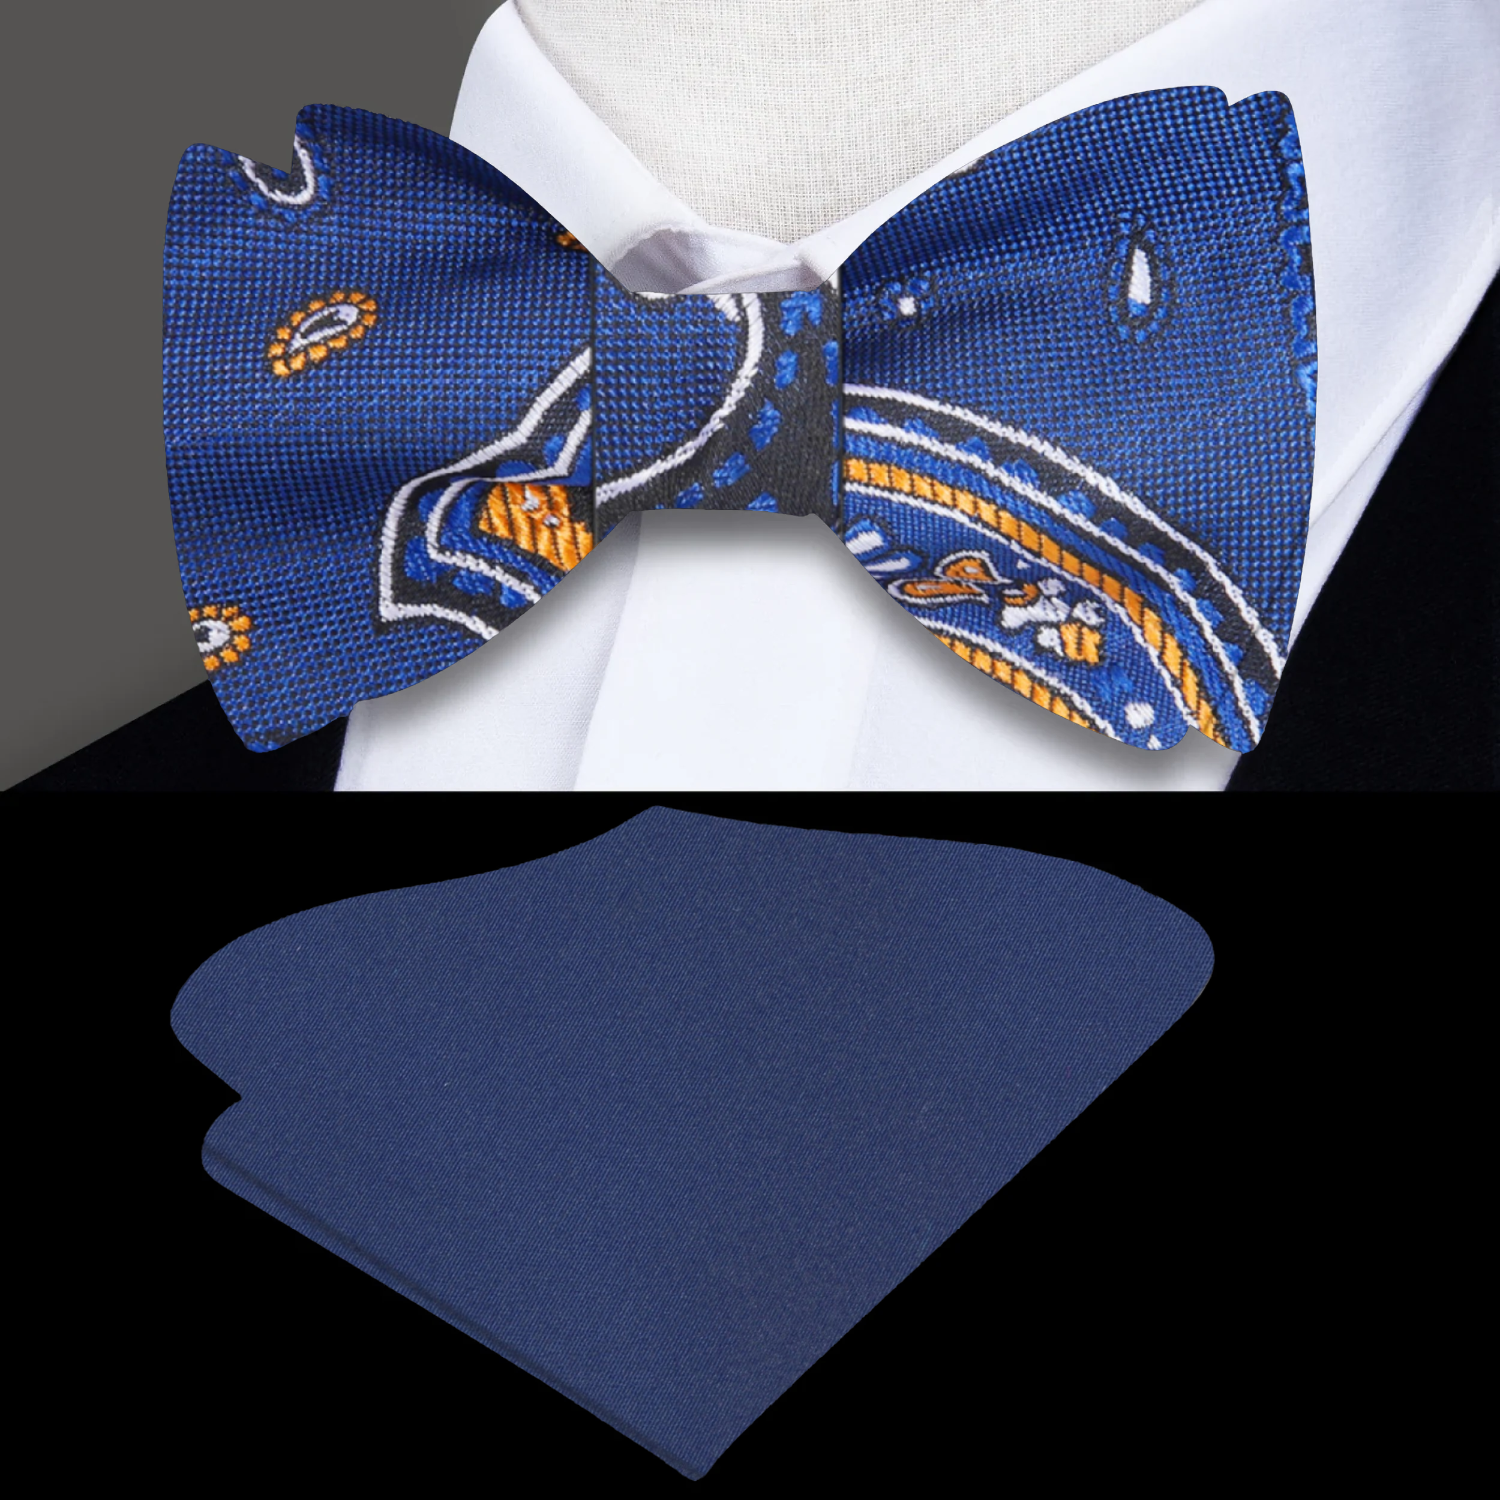 Blue Paisley Bow Tie and Blue Pocket Square